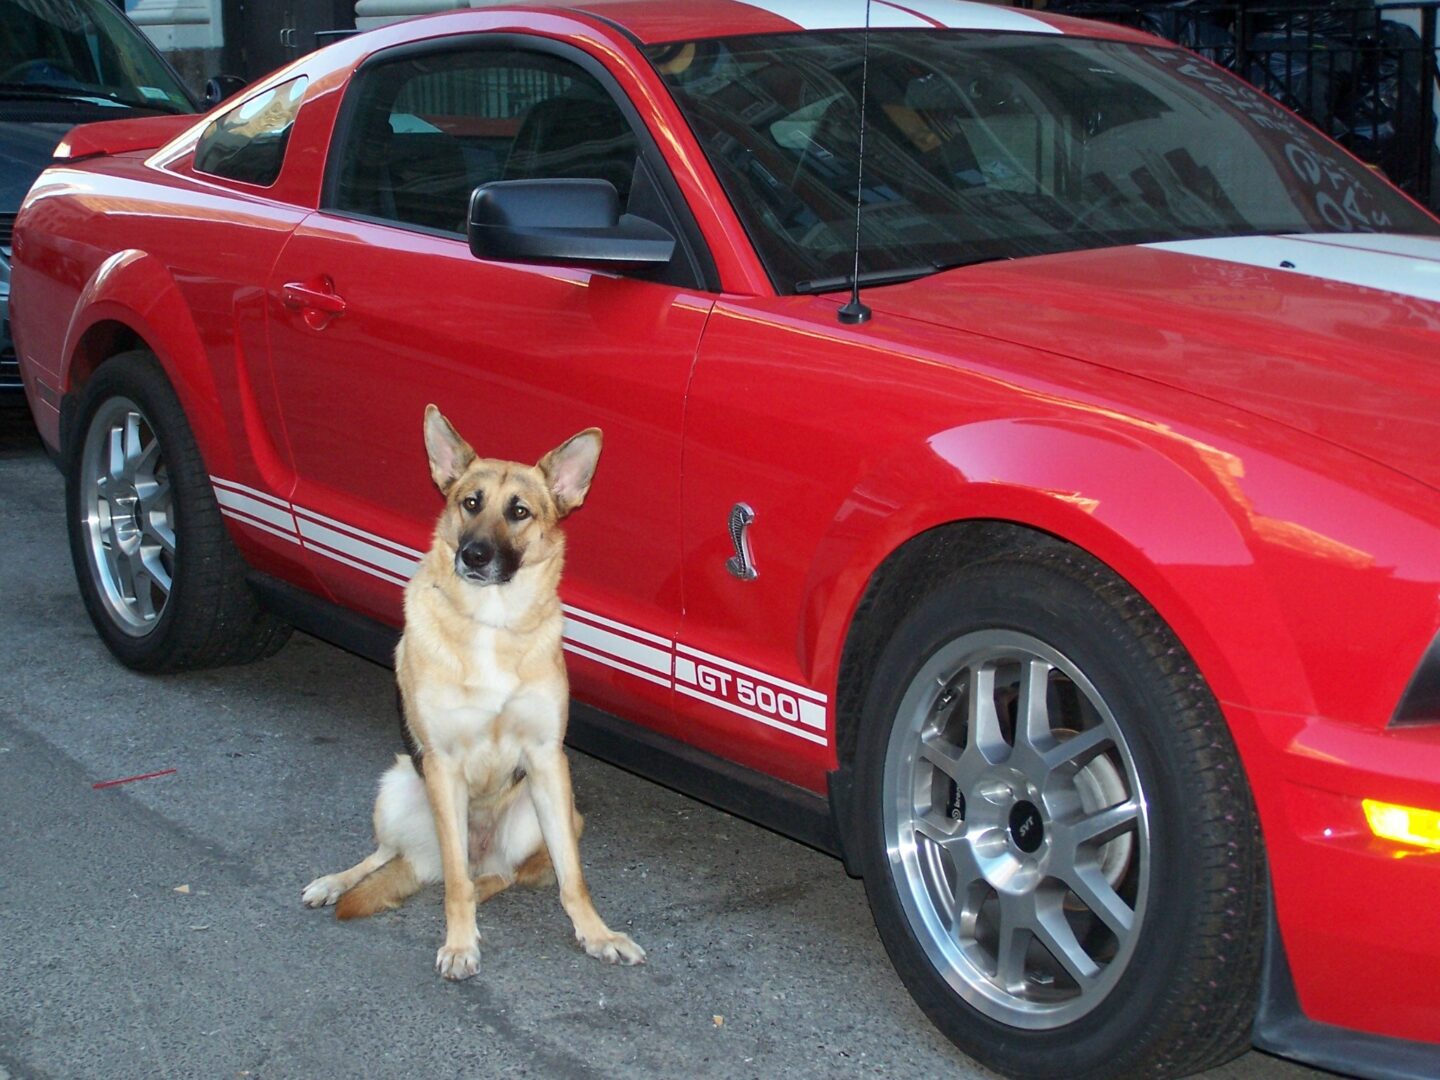 German Shepard sitting next to a red sports car